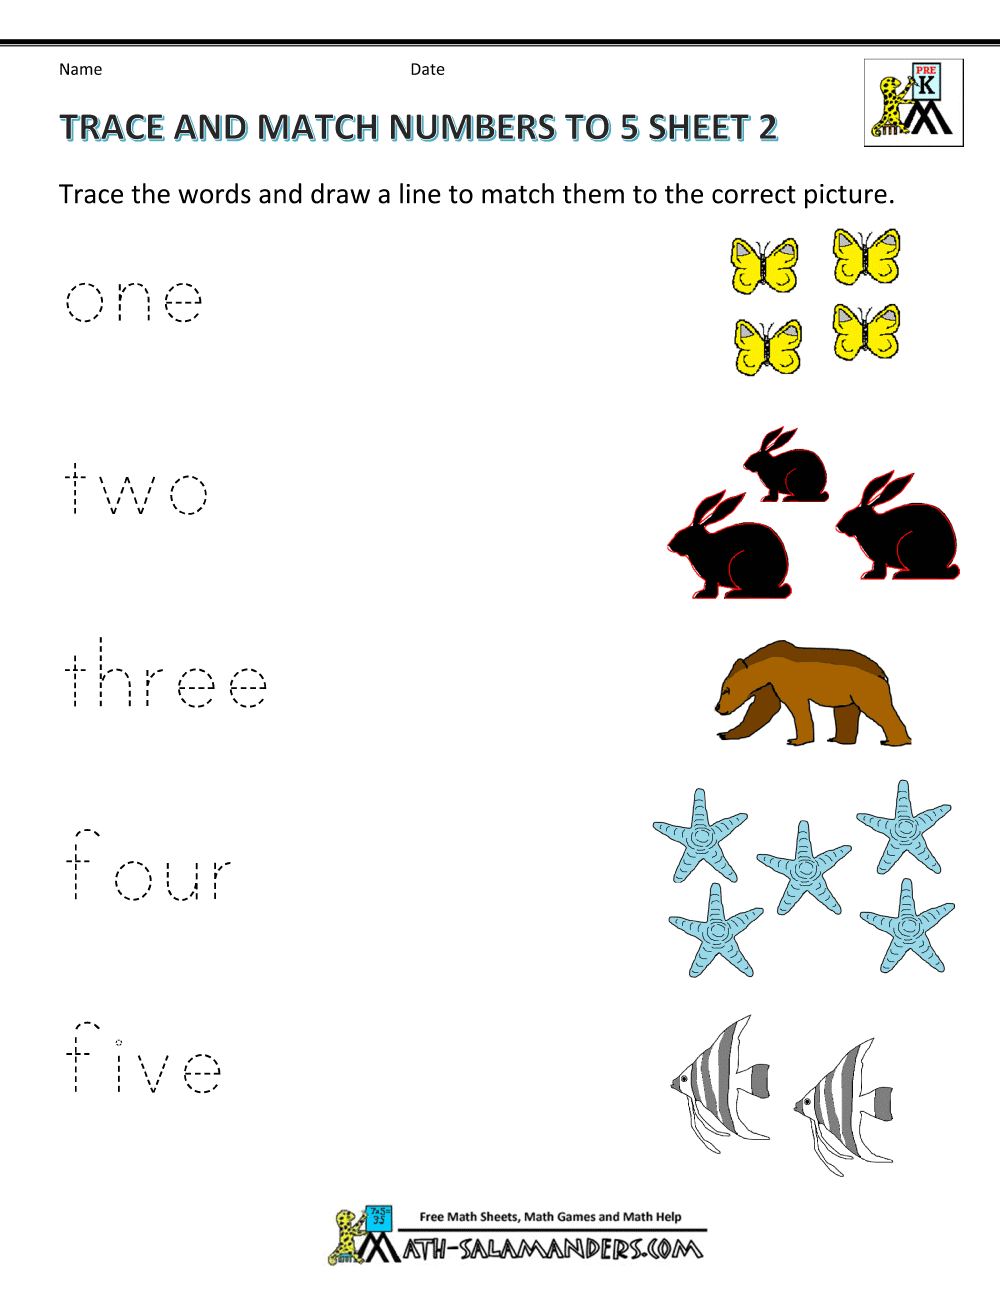 preschool printable worksheets trace and match numbers to 5 2 - Printable Mathematics Worksheets For Kindergarten